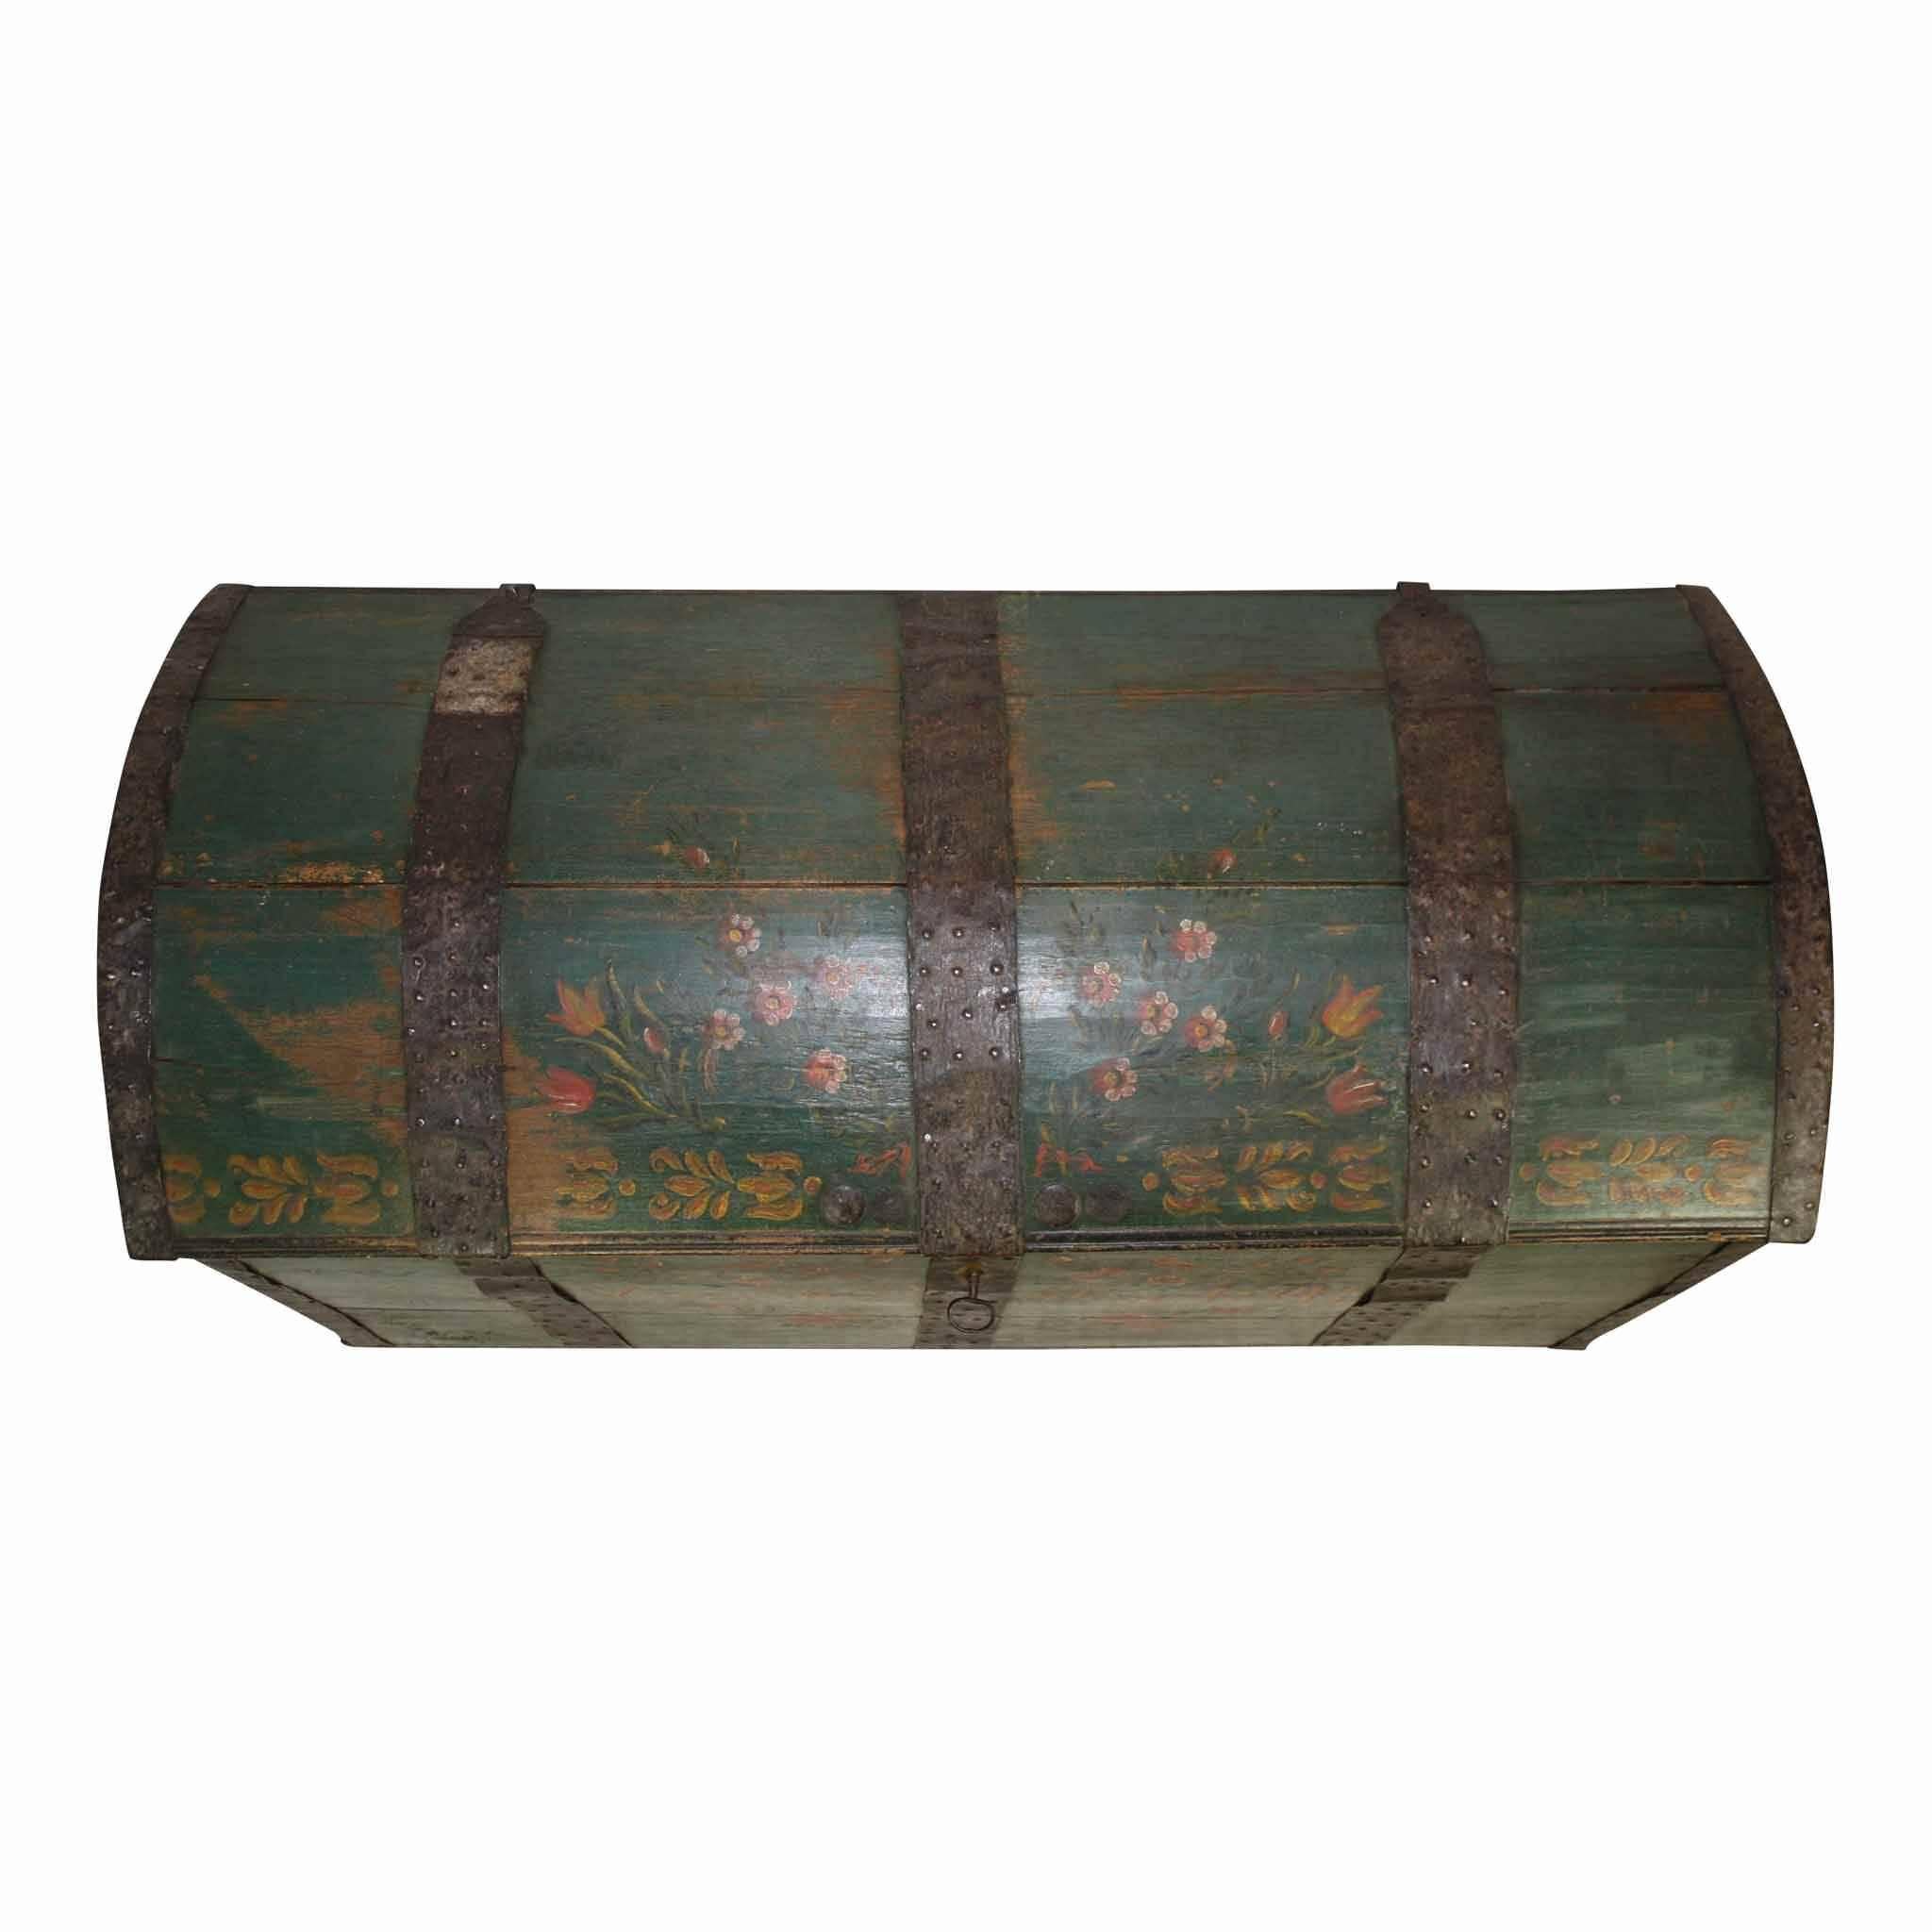 Metal bands and corners lend protection and style to this dome top trunk. A name and a date of 1841 has been painted on the front. A green background with pink flowers and birds decorates the front and lid of the trunk.